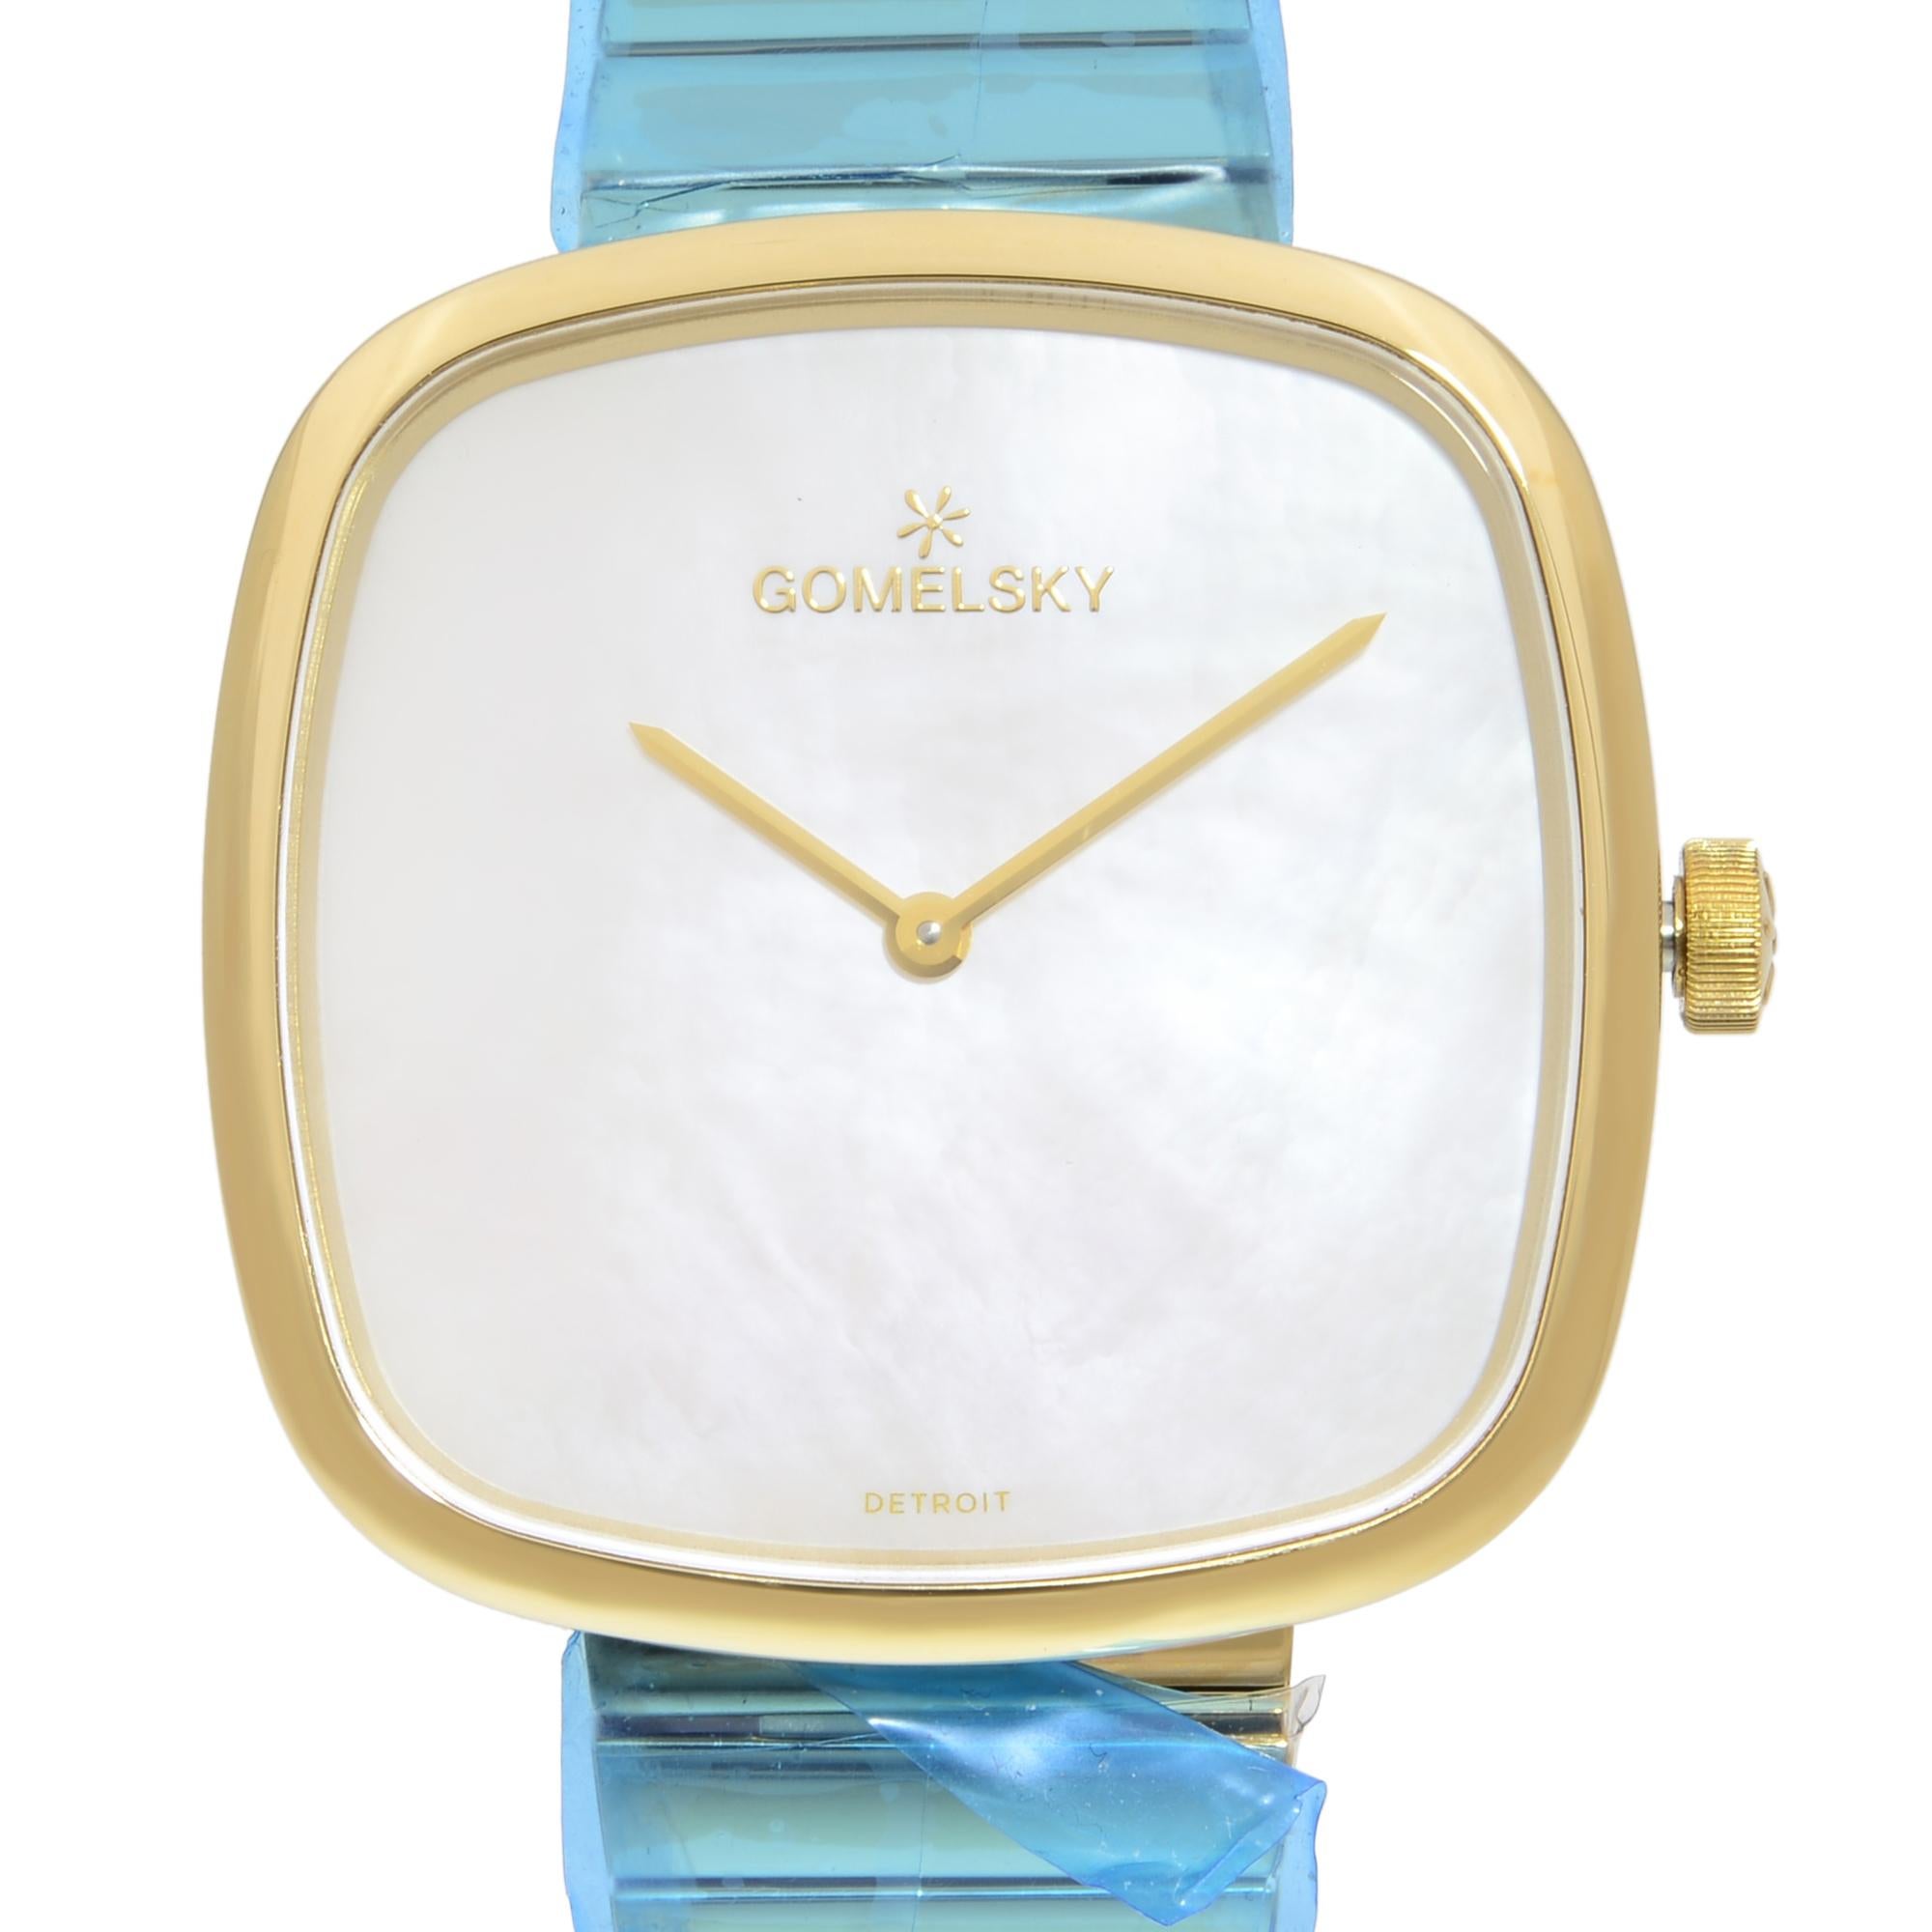 This brand new Gomelsky Eppie  G0120089478 is a beautiful Ladie's timepiece that is powered by quartz (battery) movement which is cased in a stainless steel case. It has a round shape face,  dial, and has hand unspecified style markers. It is